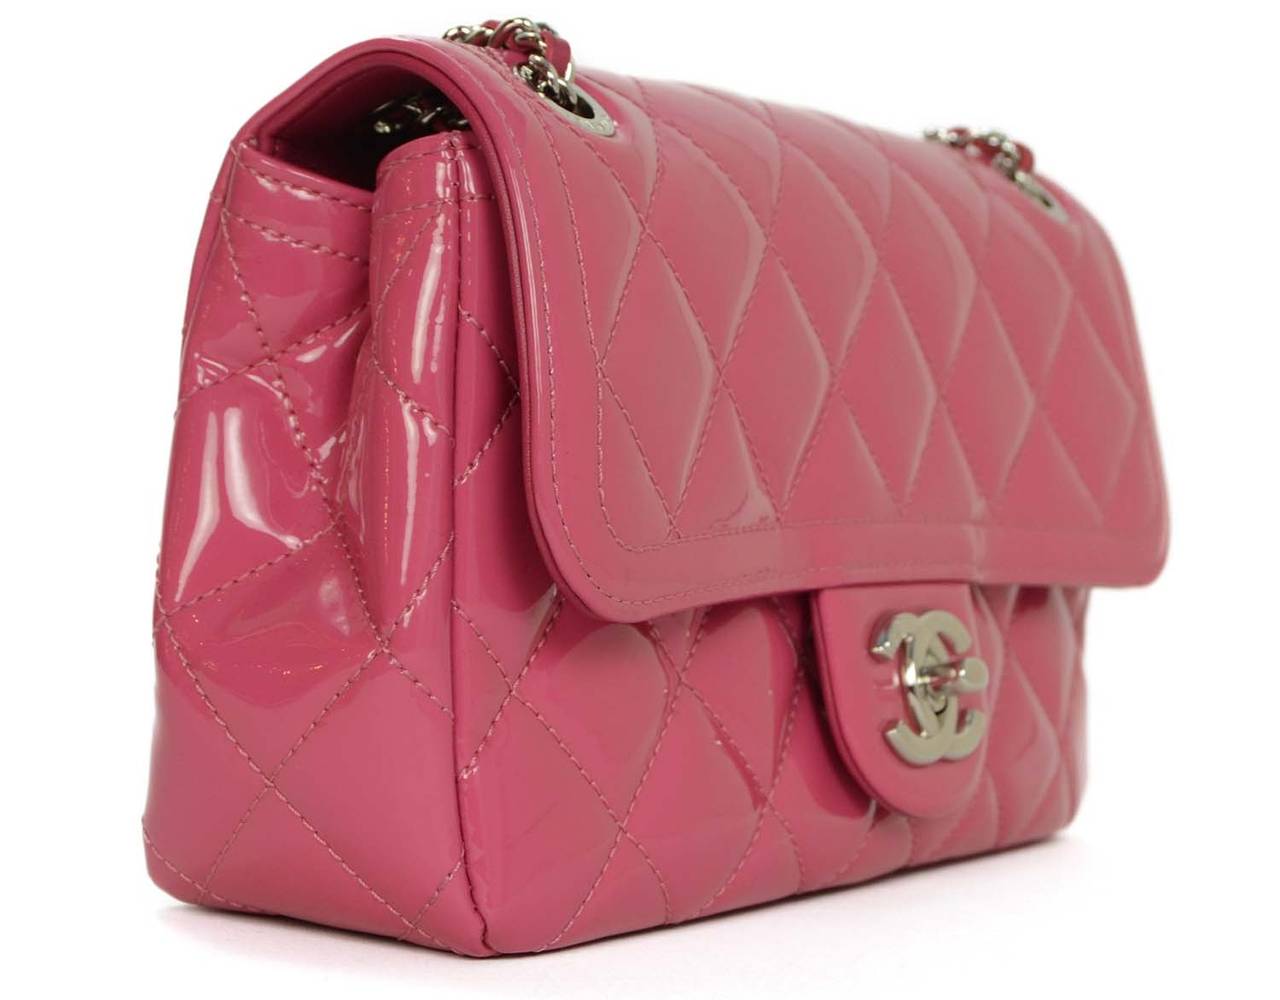 Chanel '15 Pink Quilted Patent Small Flap Bag
Features adjustable shoulder strap
Made in: Italy
Year of Production: 2015
Color: Pink
Hardware: Silvertone
Materials: Patent leather
Lining: Black canvas
Closure/opening: Flap top with CC twist